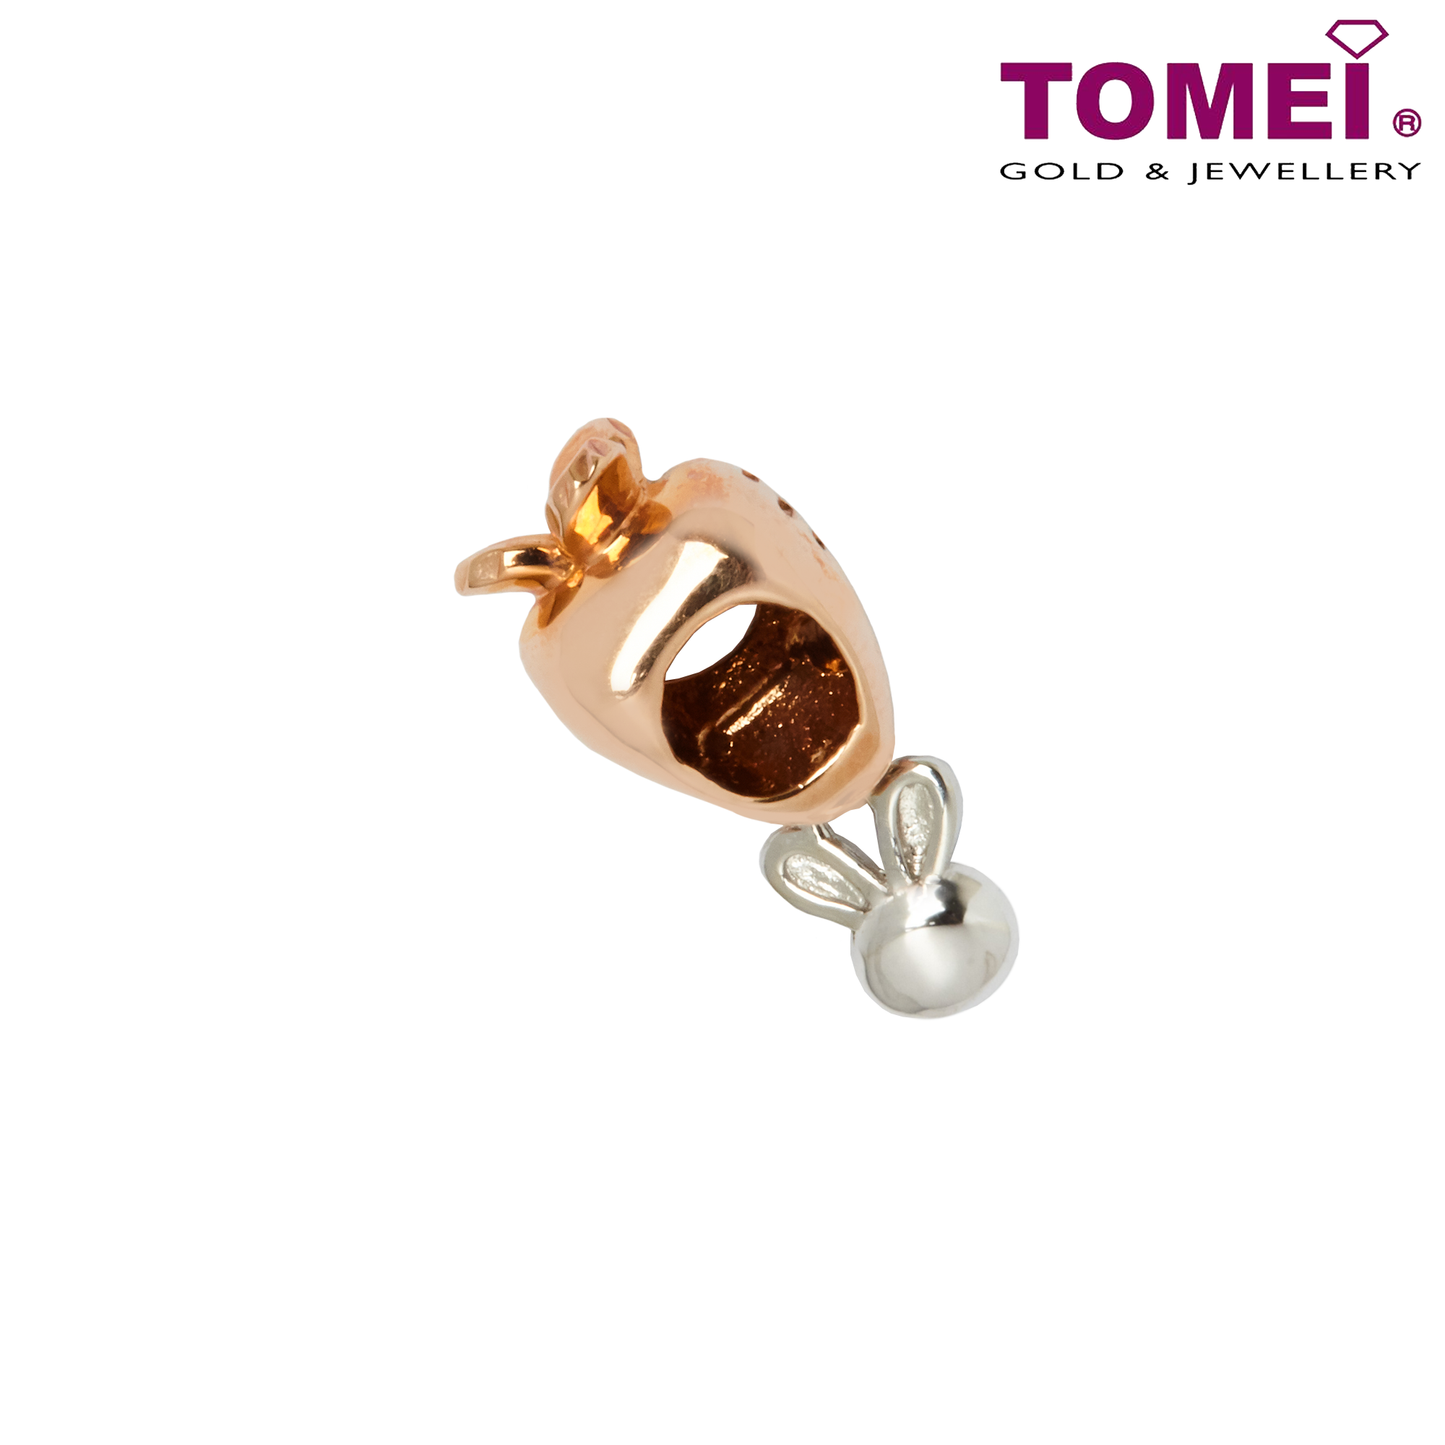 TOMEI Carrot of Today Charm | Tomei White Gold 585 (14K) (P5789)